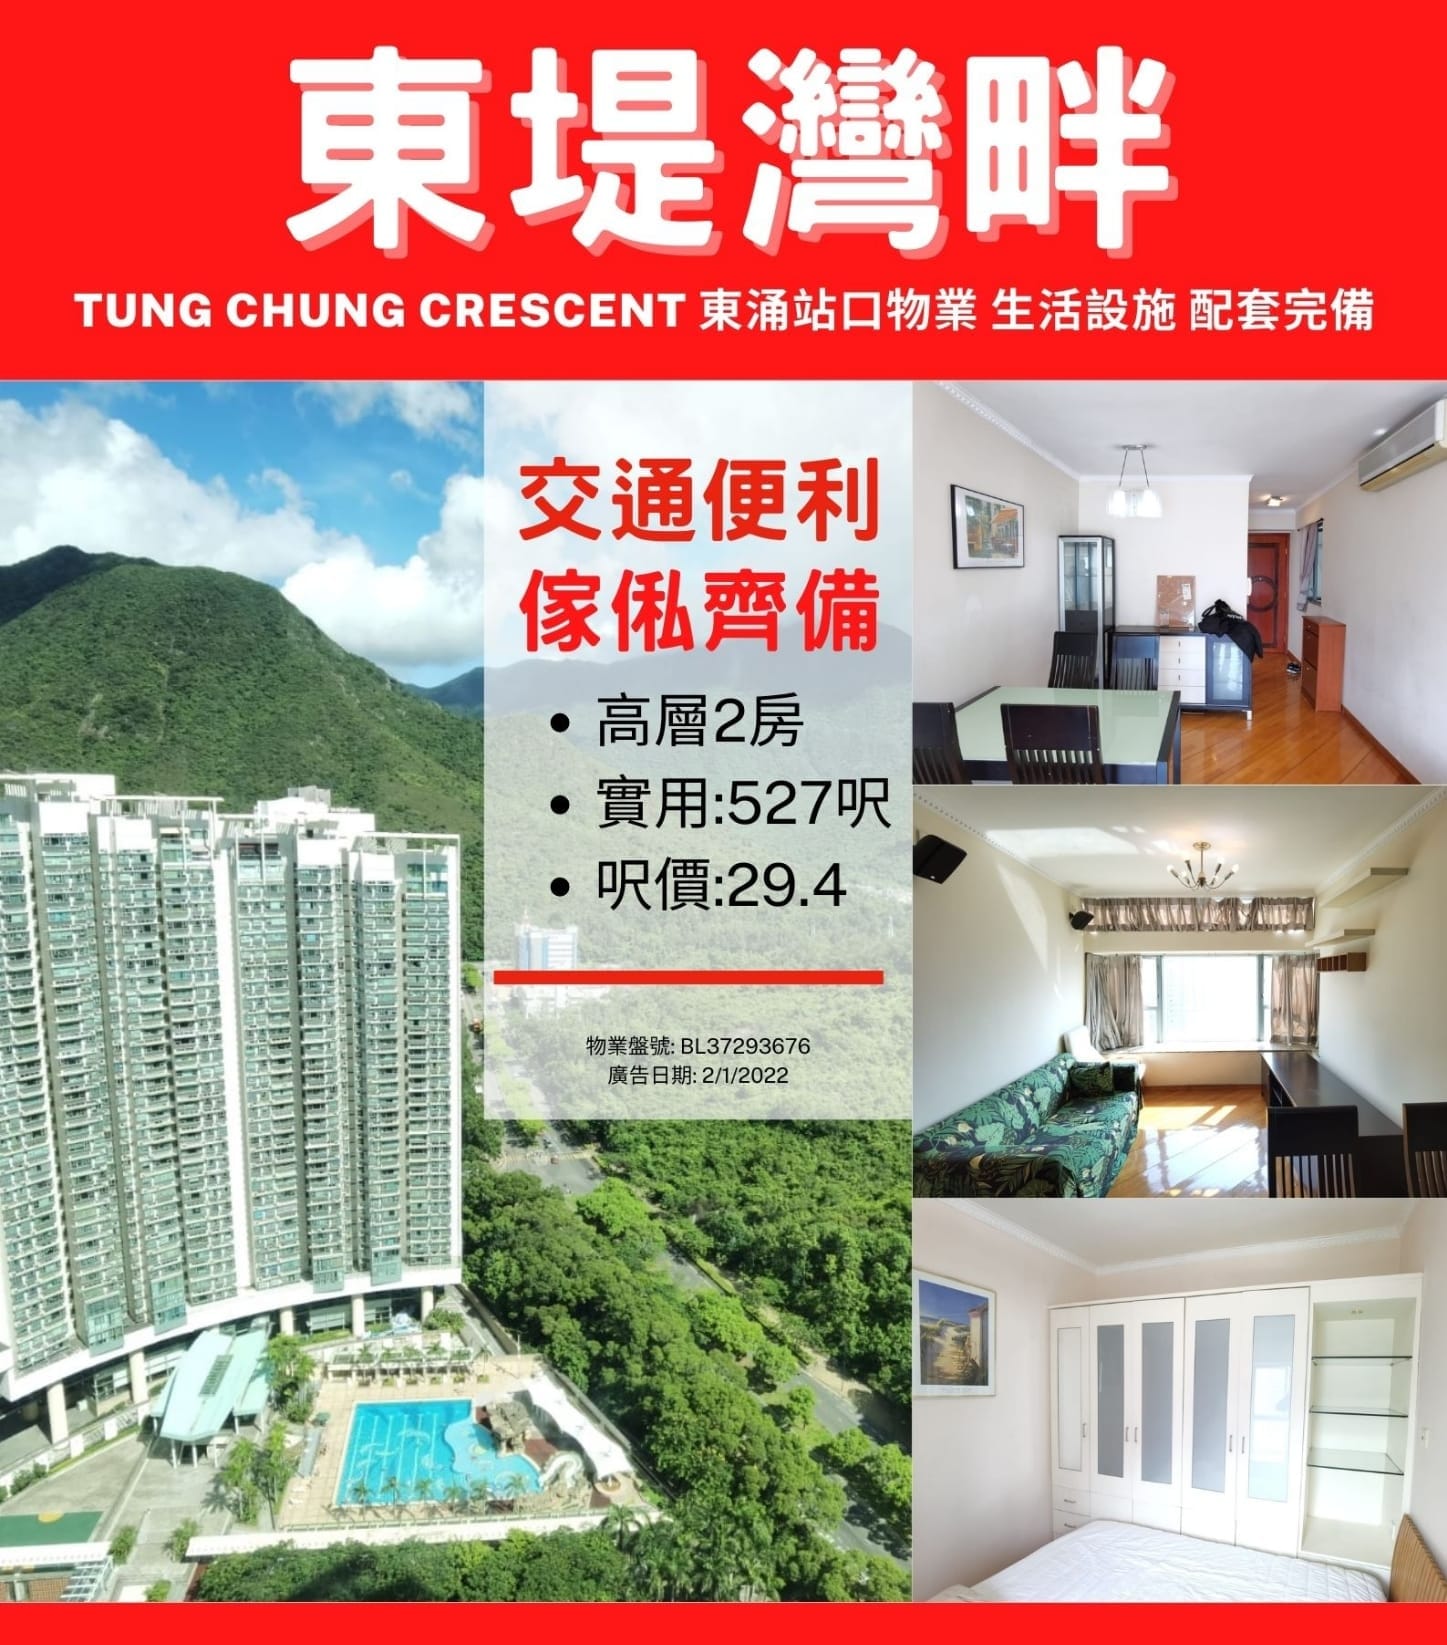 Two high-rise rooms next to the MTR station, with an open view, home appliances and furniture, and a room for rent. Approximately 67188088 Chen Sheng